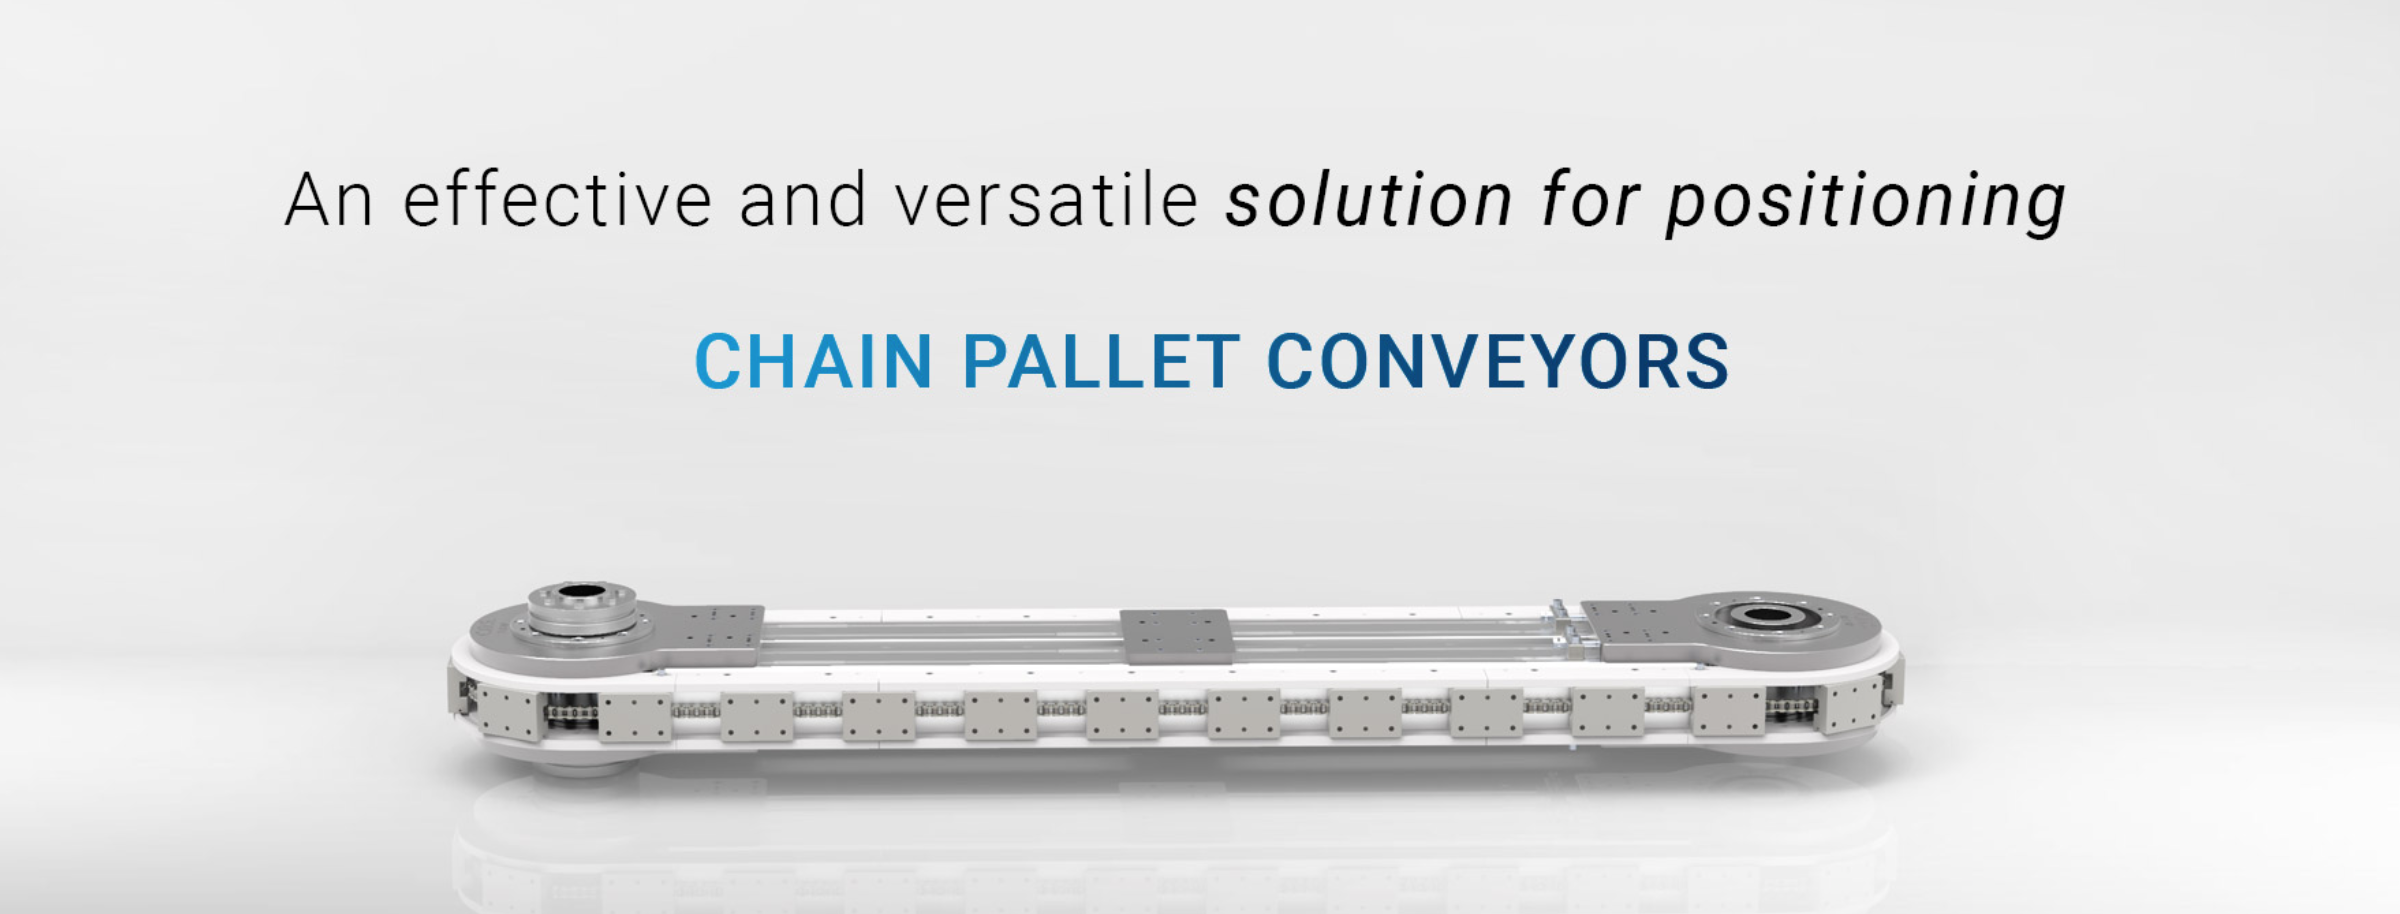 CDS Chain Pallet Conveyors